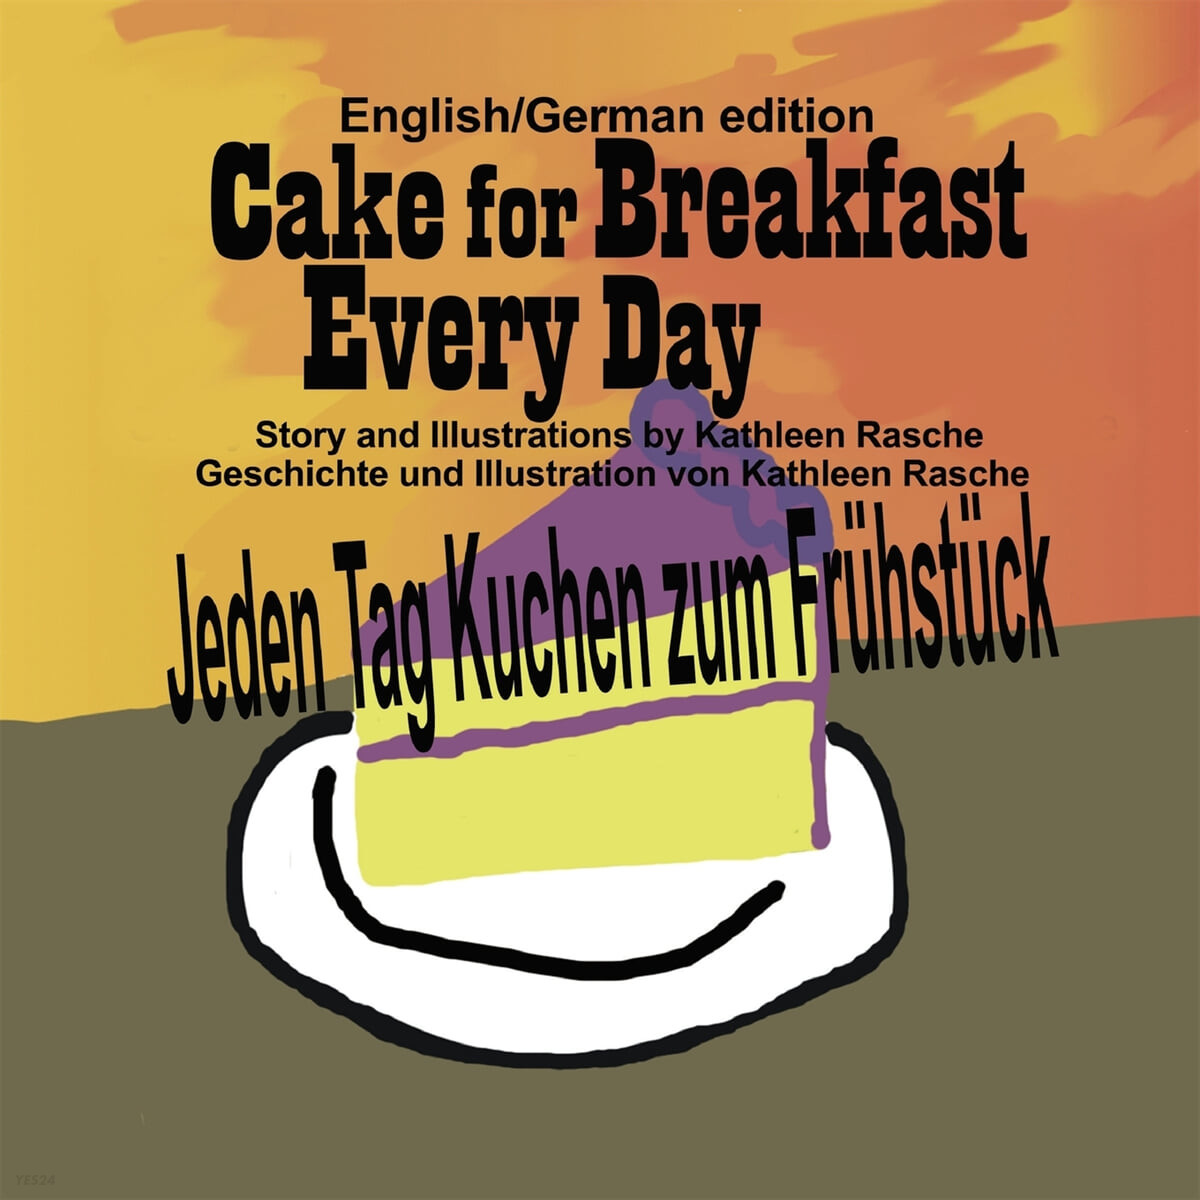 Cake for Breakfast Every Day - English/German edition